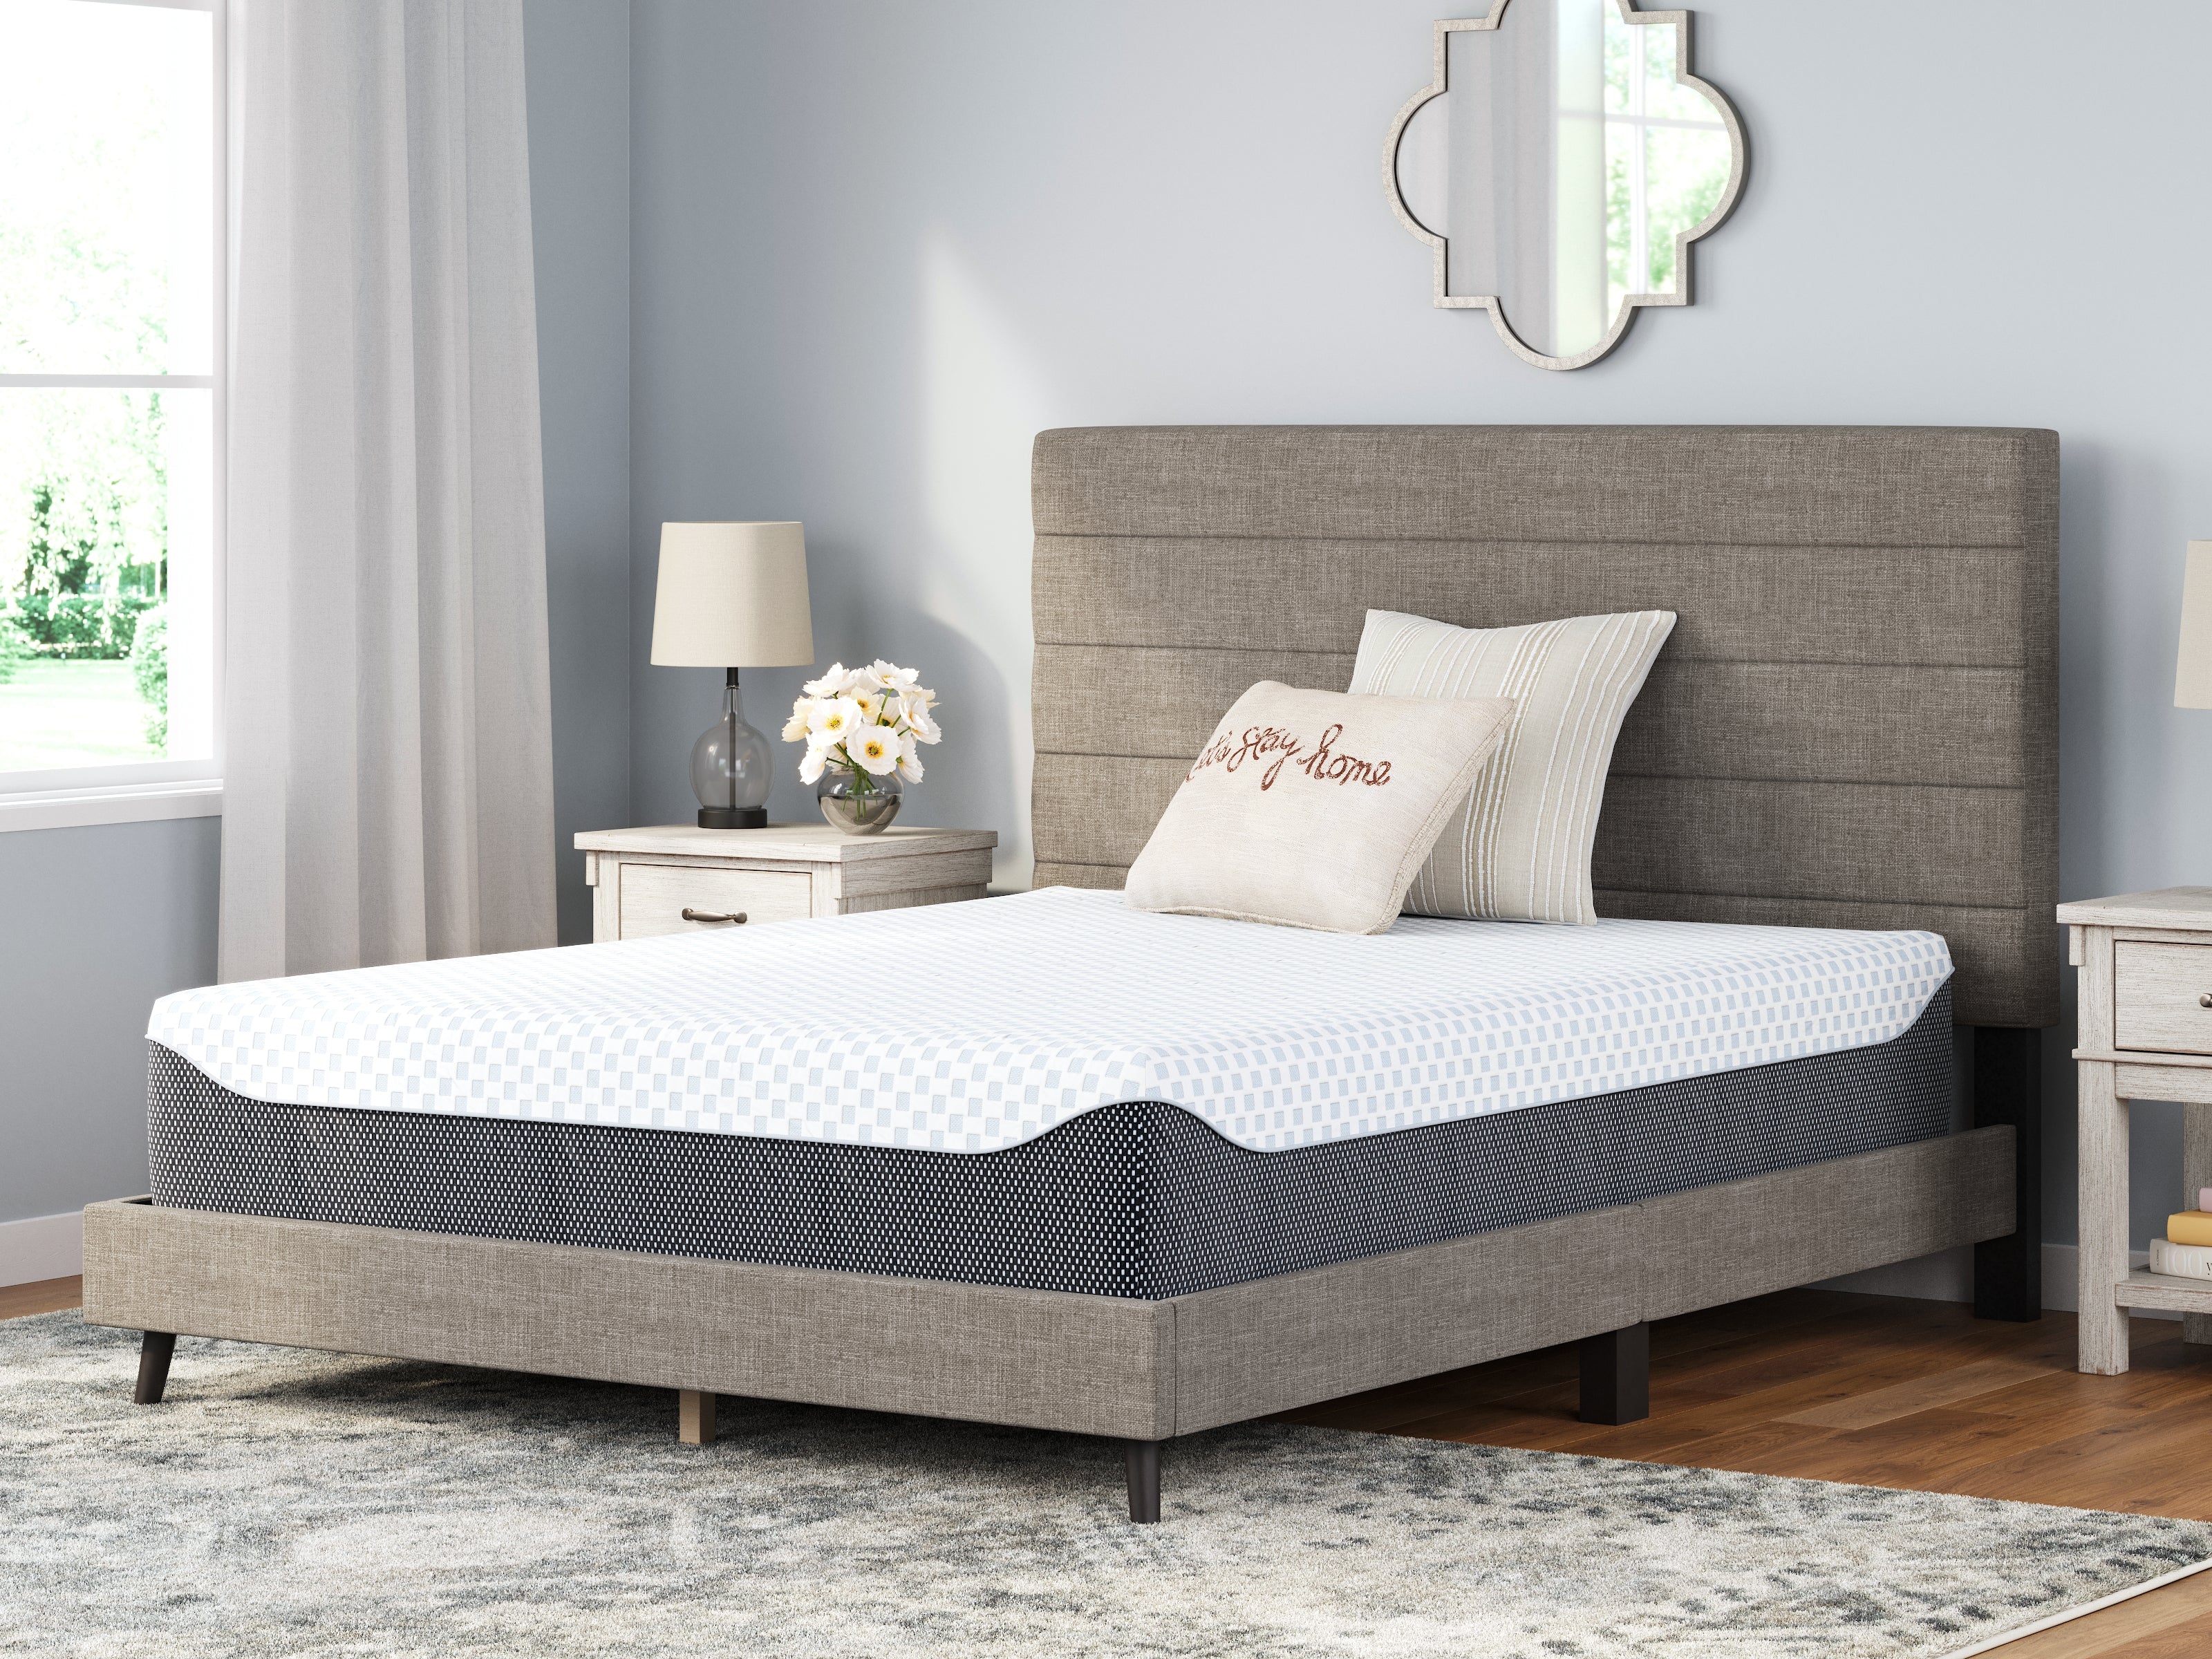 12 Inch Chime Elite Queen Memory Foam Mattress in a box with Head-Foot Model-Good Queen Adjustable Base - furniture place usa